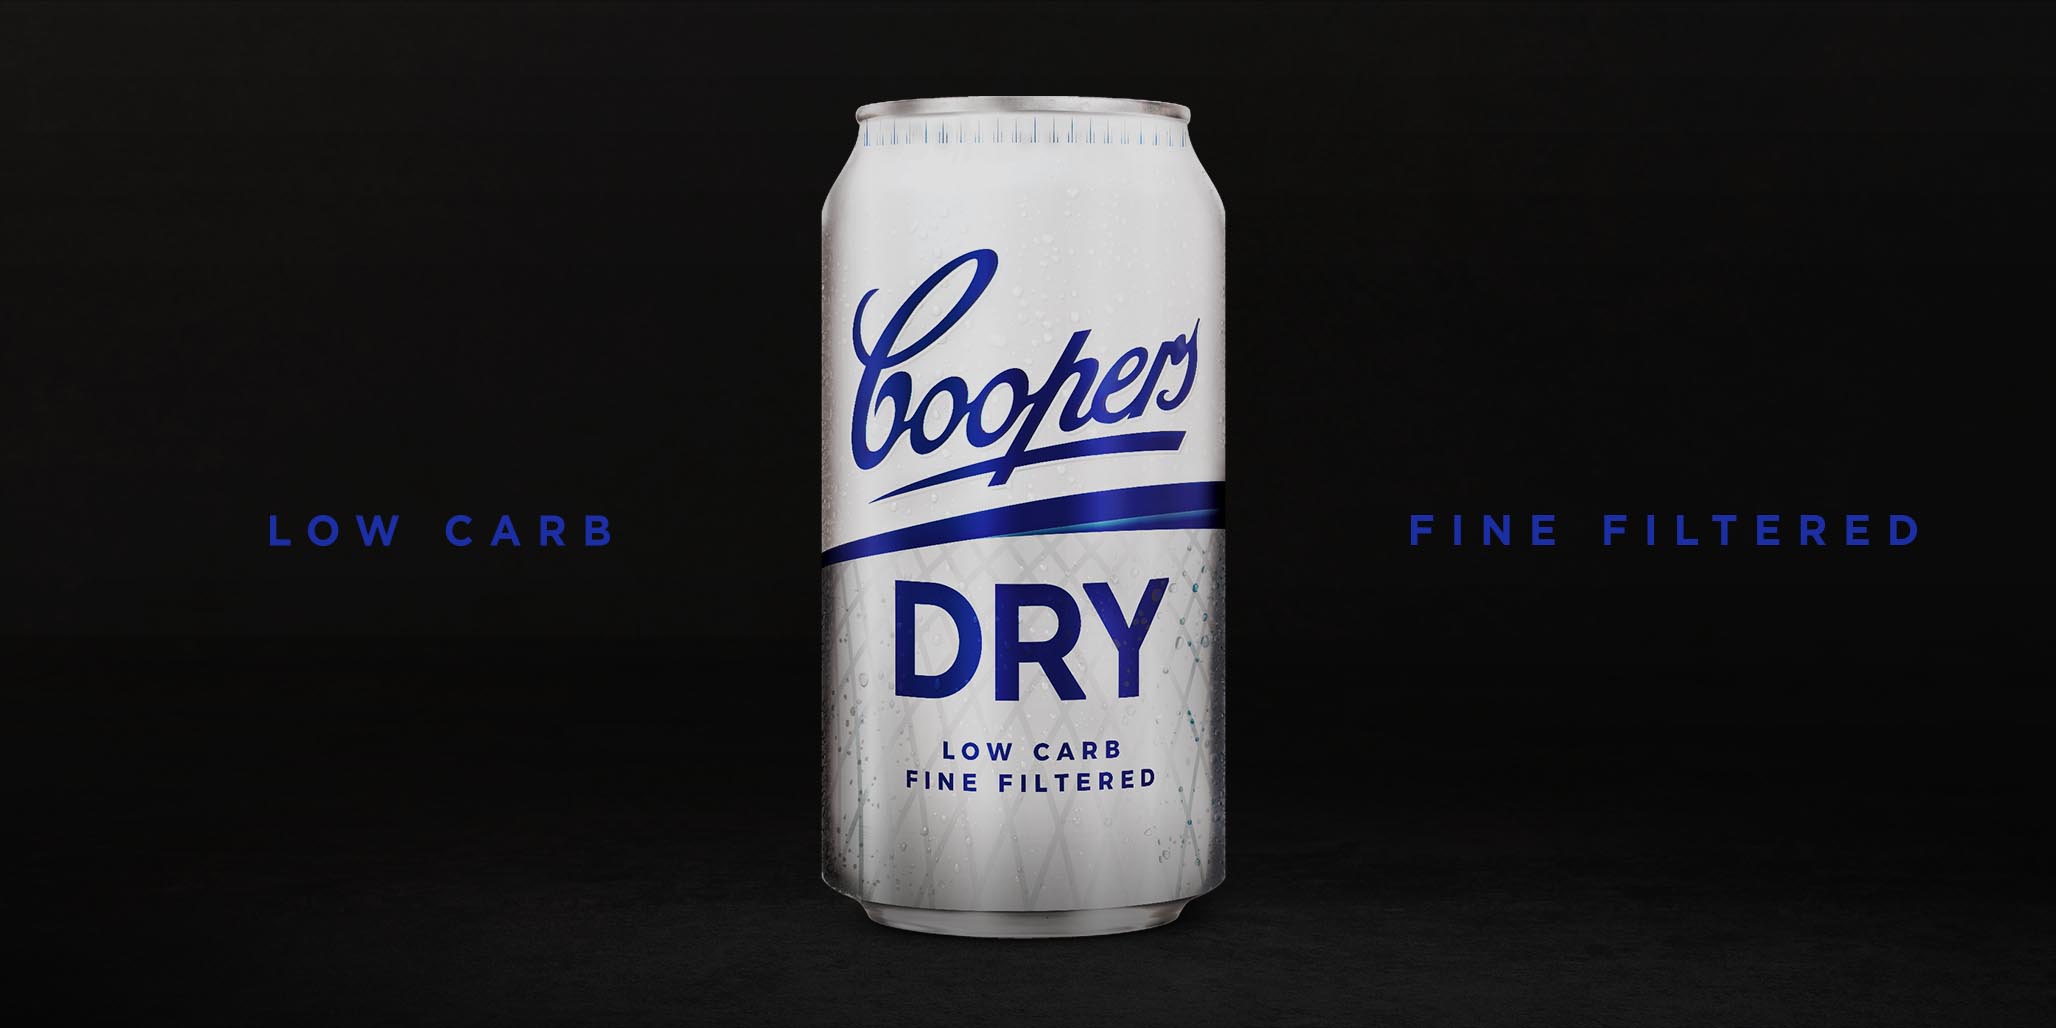 Packaging Design Sydney project for Coopers Beer Brewery by Australian packaging design agency Percept, image H